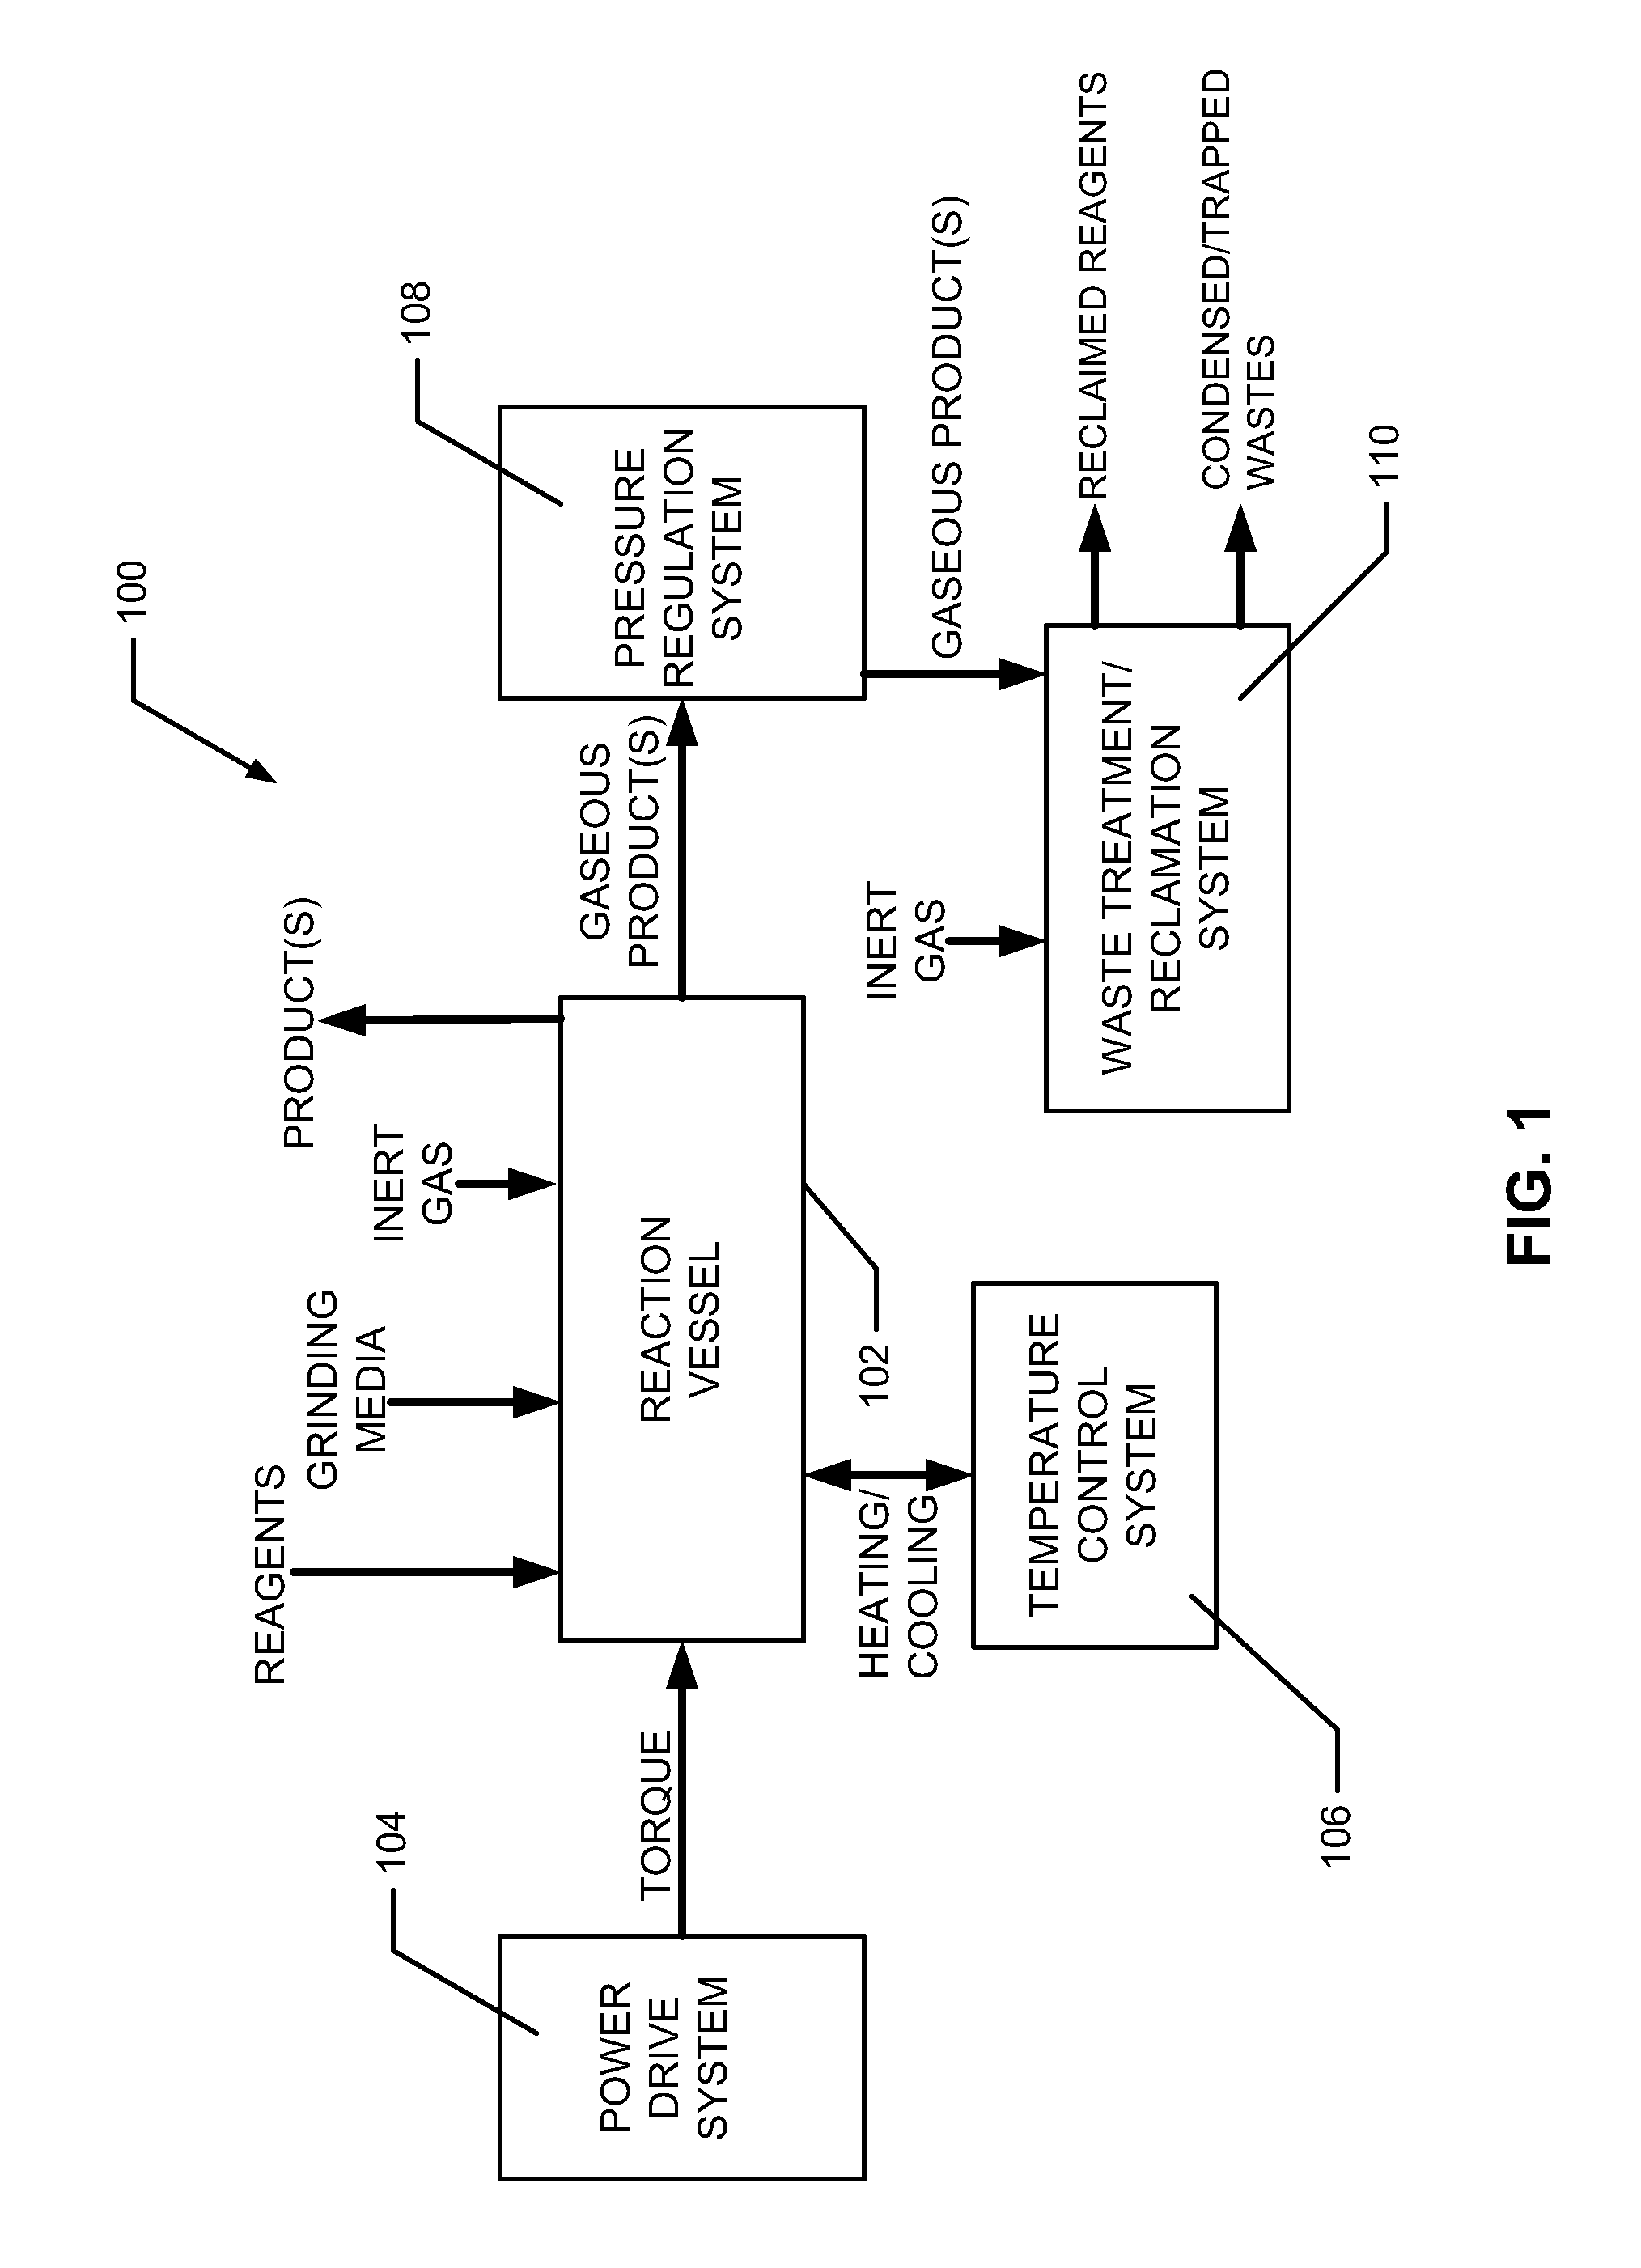 Process and device for the production of polyhedral boranes